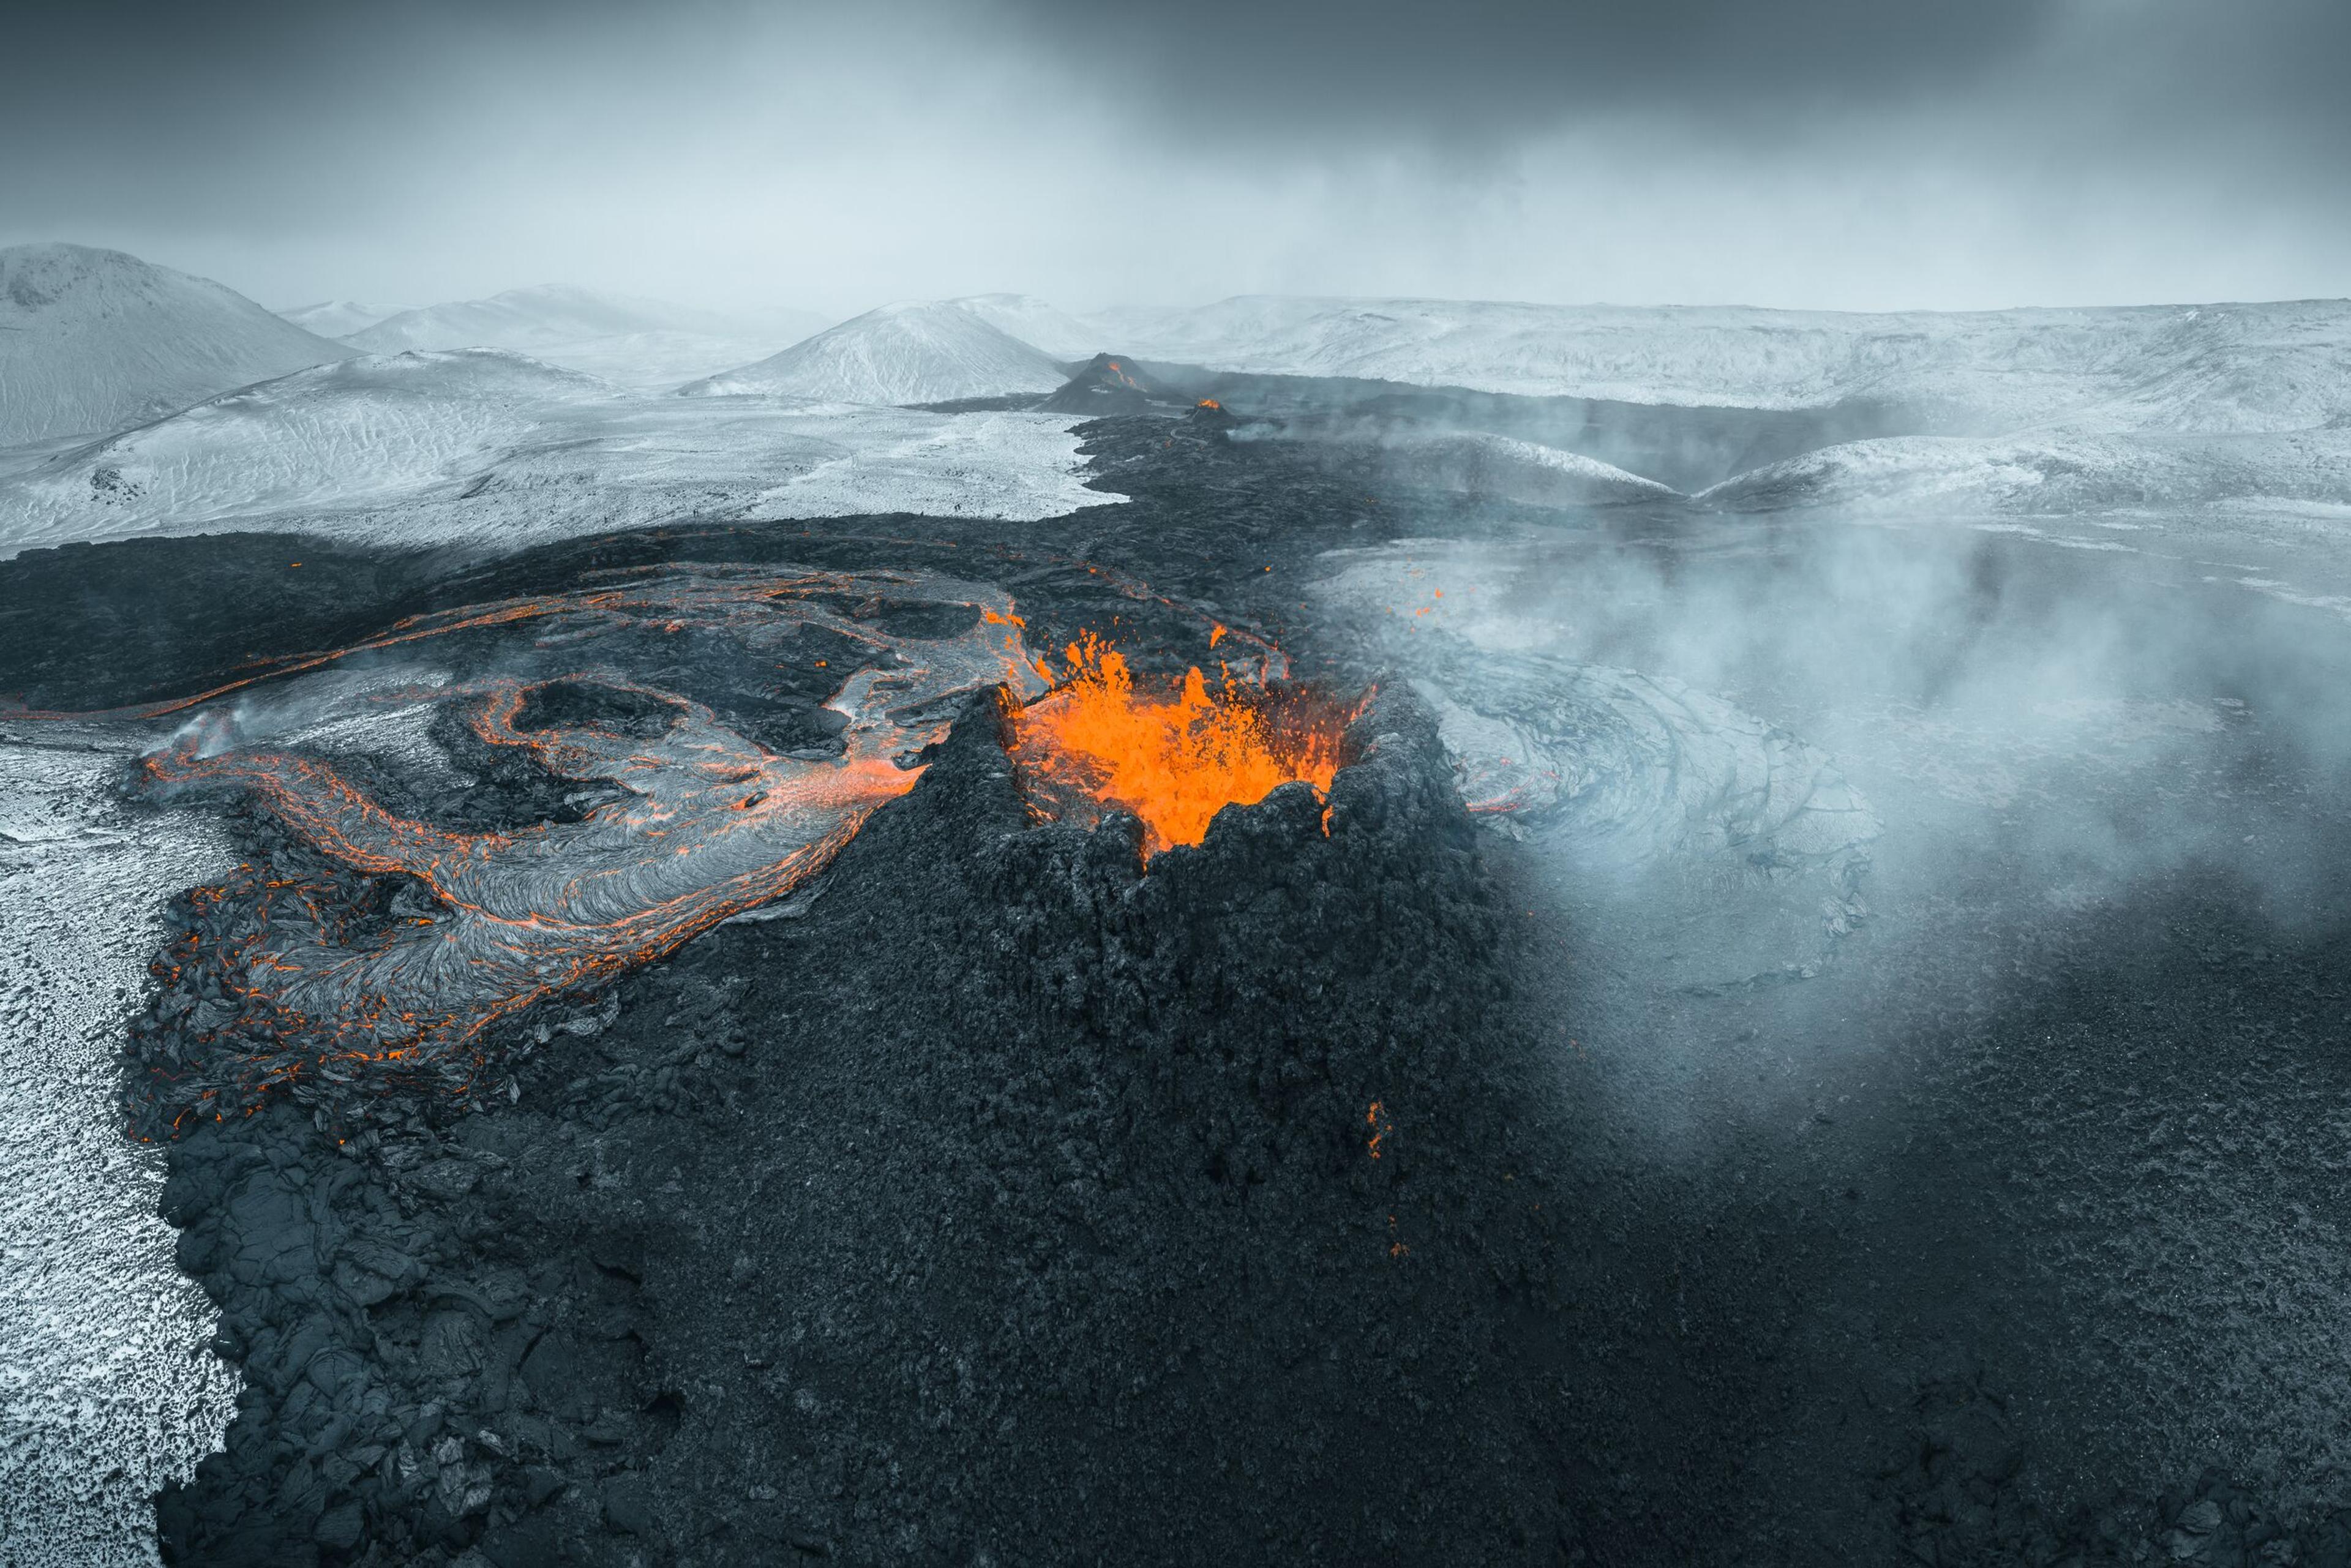 Contrasting view of a vibrant orange volcanic crater amidst a snowy landscape under a cloudy sky.